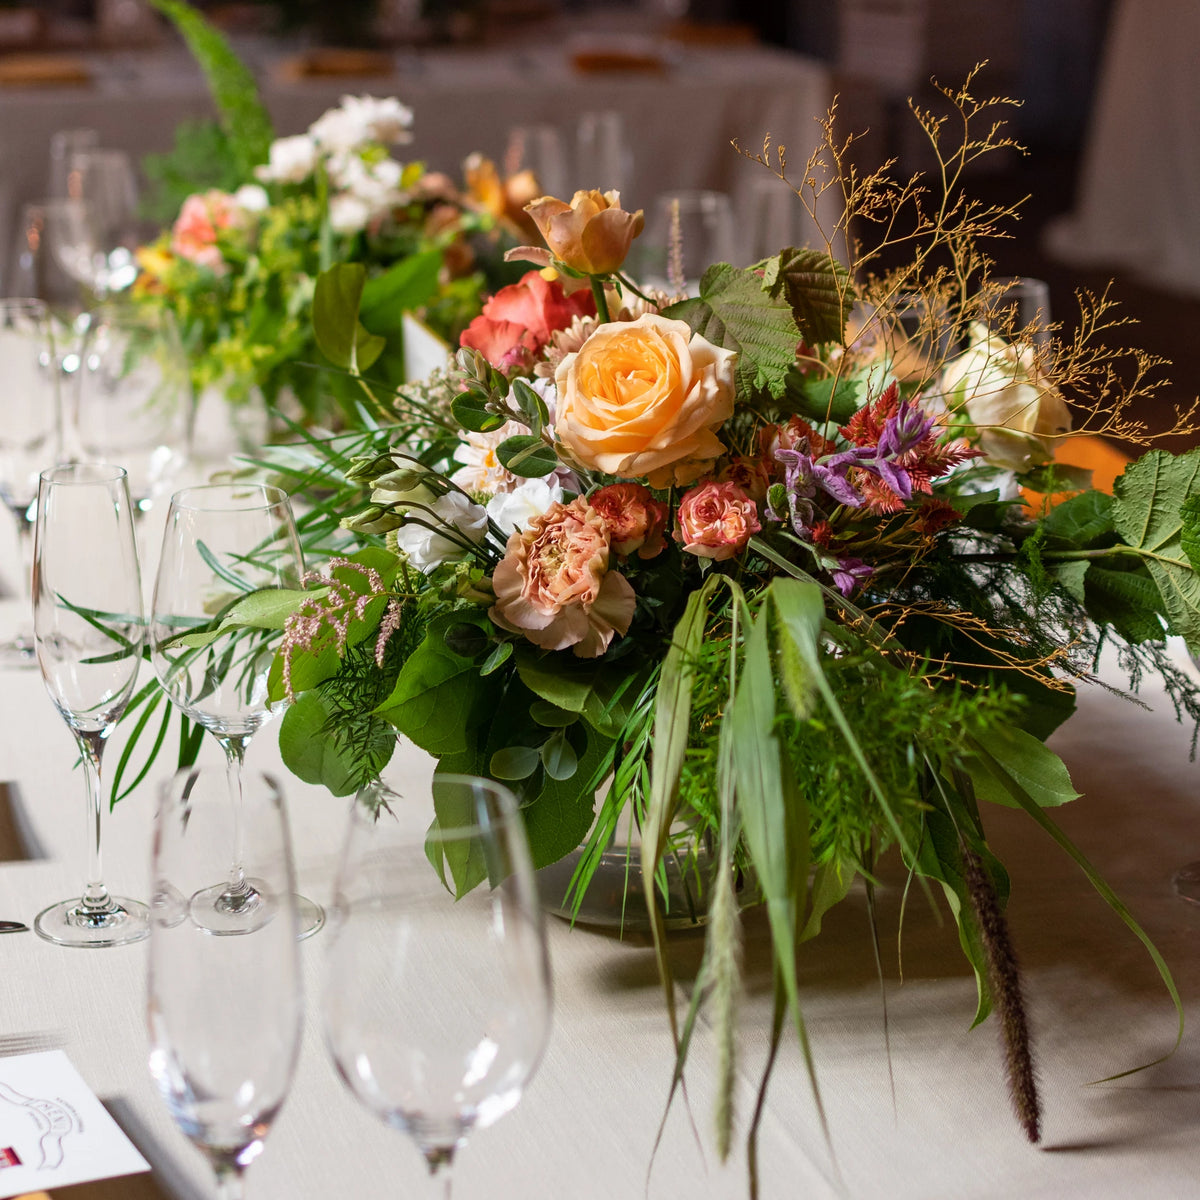 Wedding floral arrangement sits on a white tablecloth surrounded by polished wine glasses